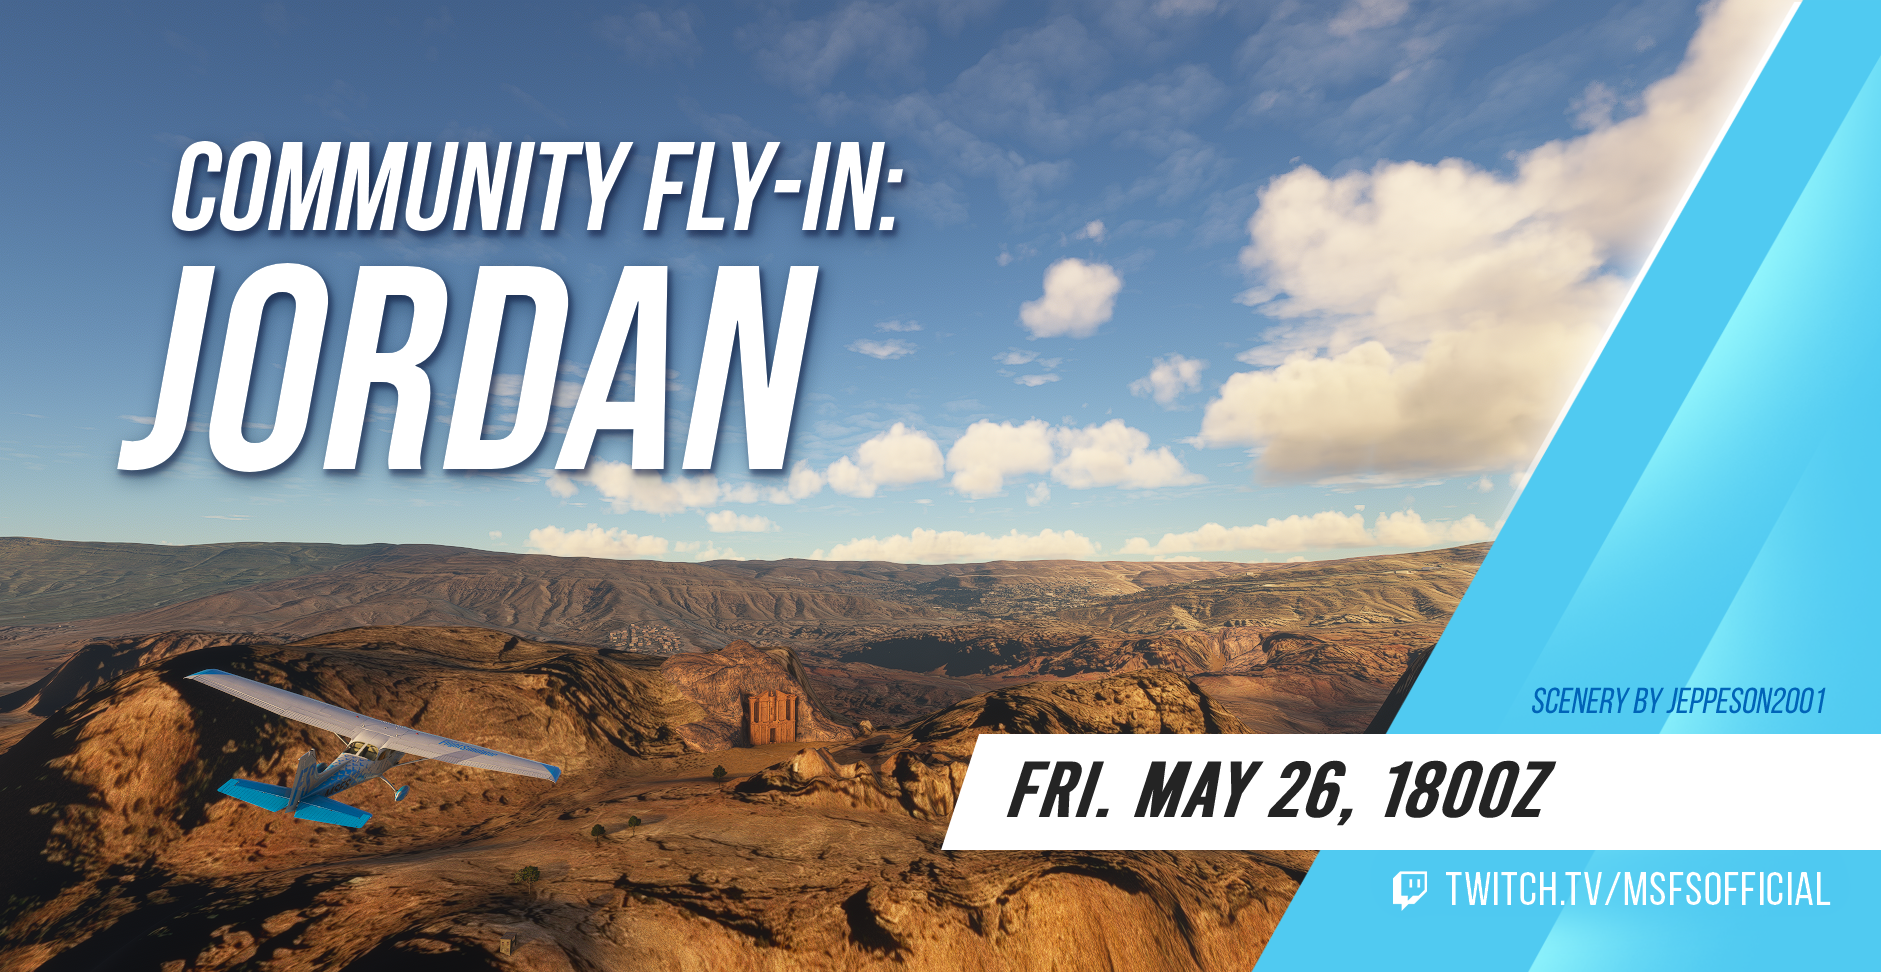 Community Fly-In: Jordan. Join us at twitch.tv/msfsofficial on Friday May 26th at 1800Z! Bonus scenery by Jeppeson2001